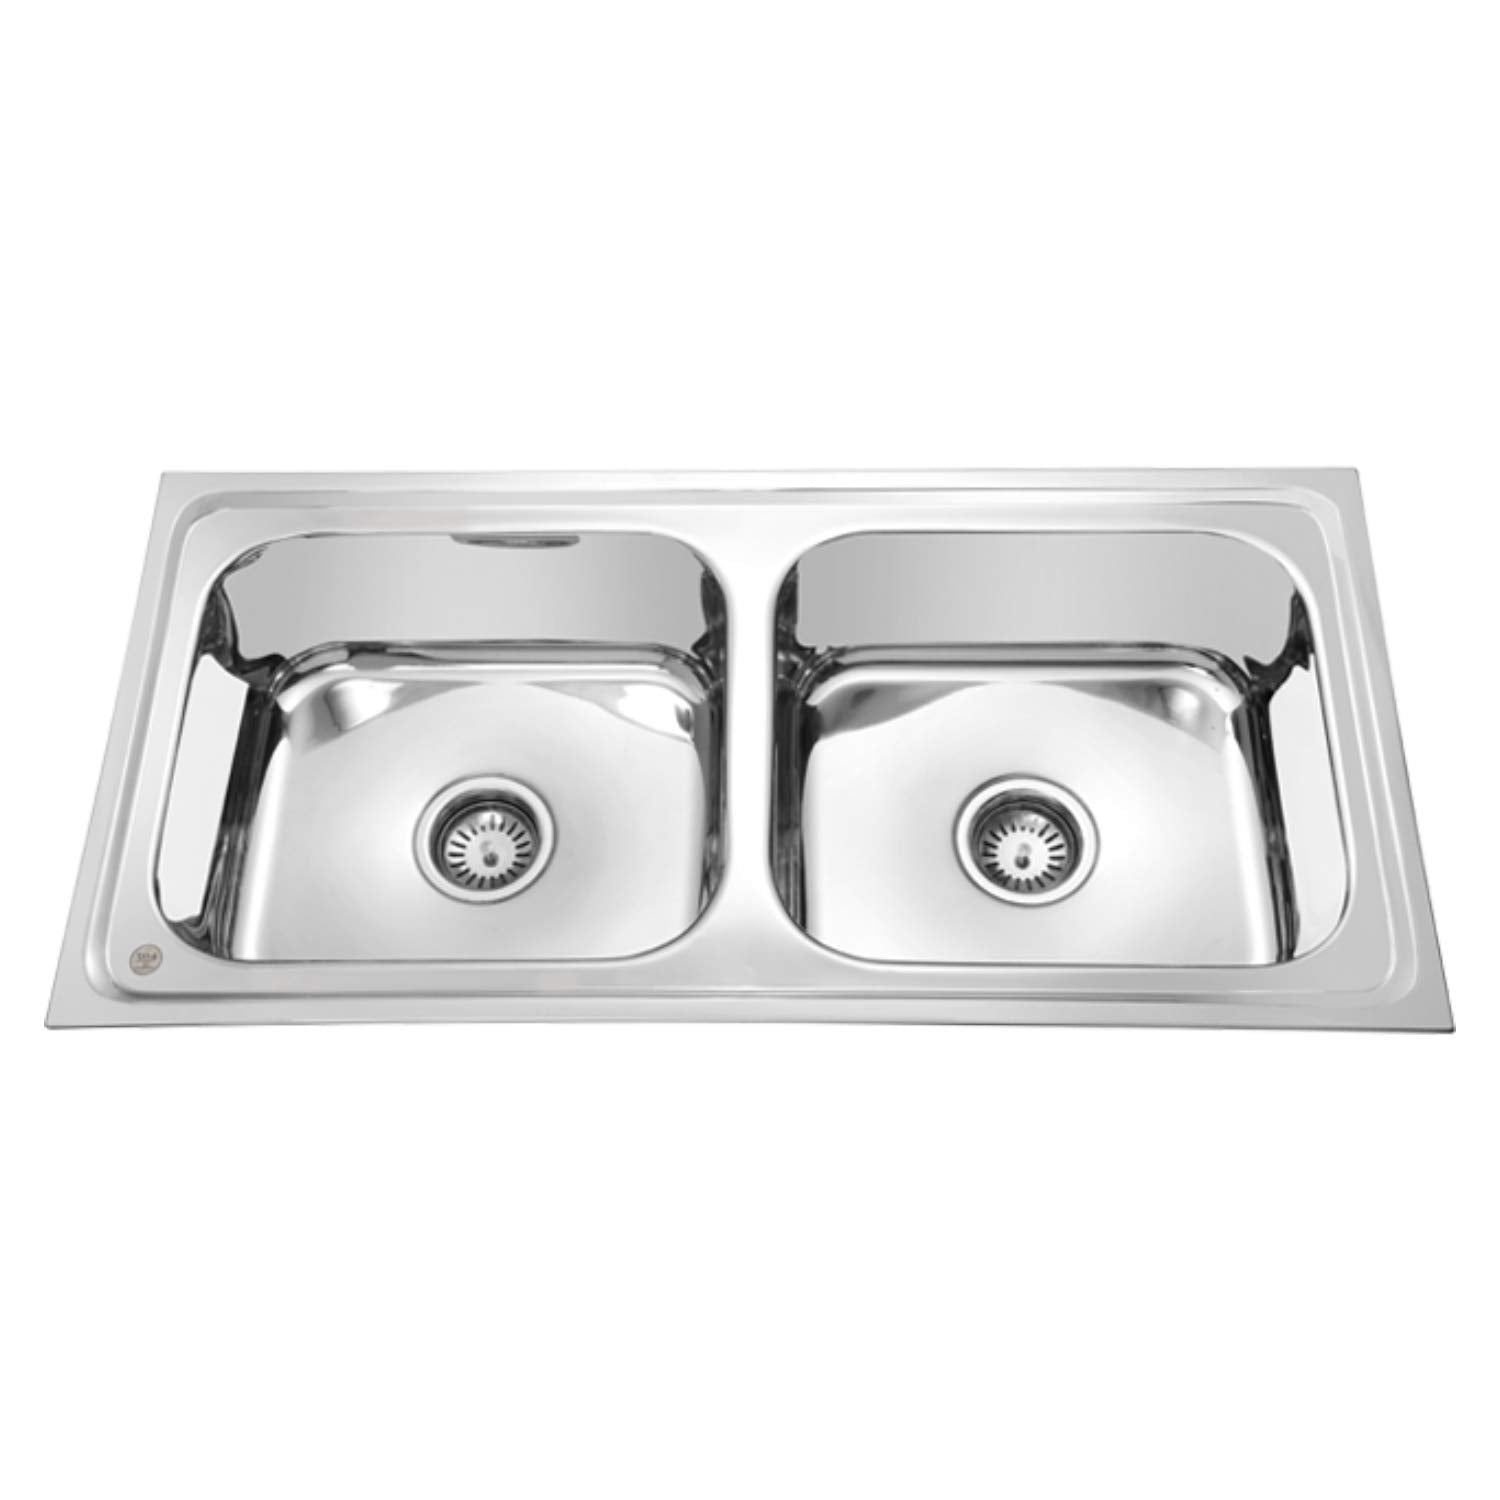 Parryware C857081 Eco Series (New) Folded Edge- Gloss Finish Double Bowl Kitchen Sink